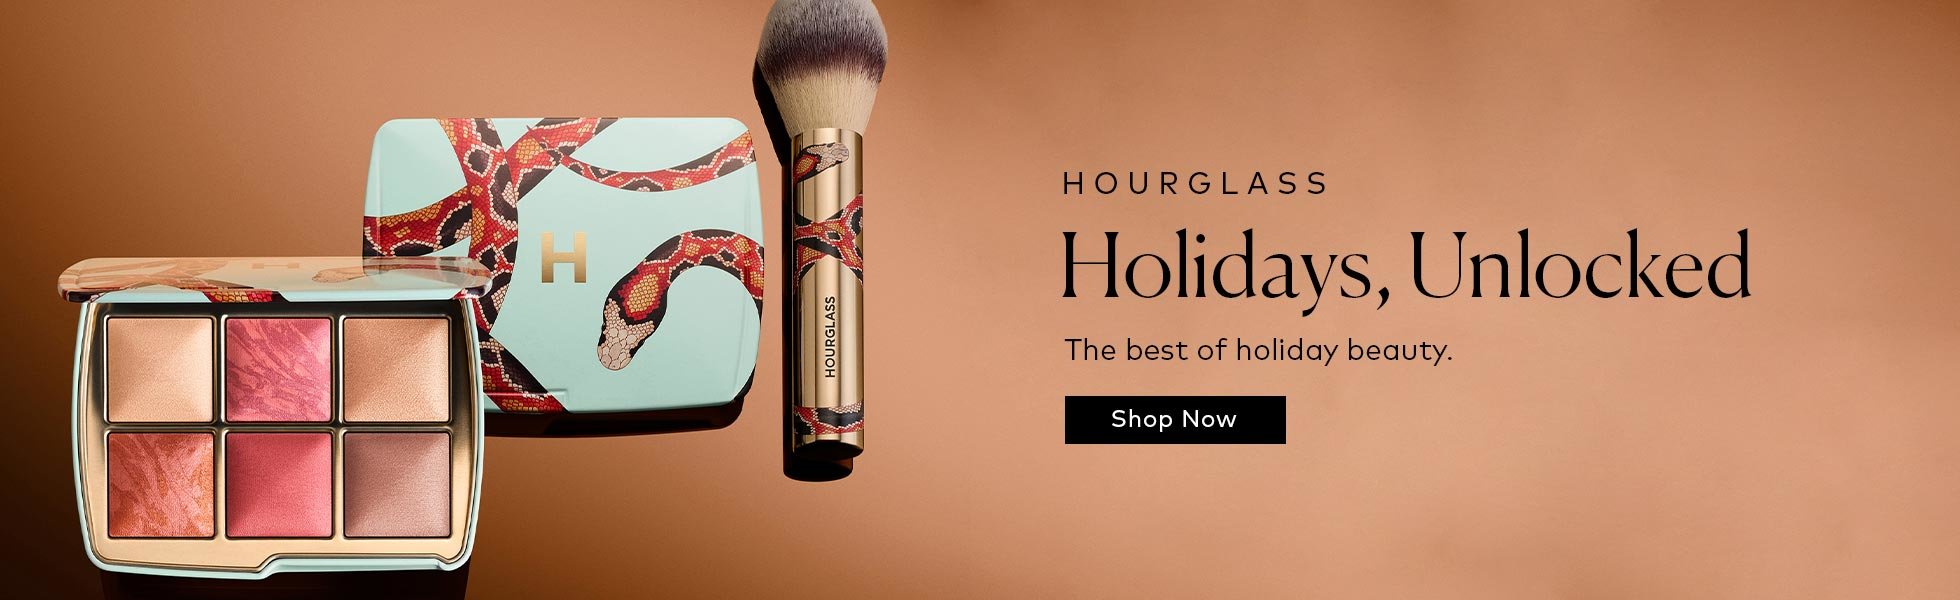 Shop the Hourglass Holiday Collection at Beautylish.com